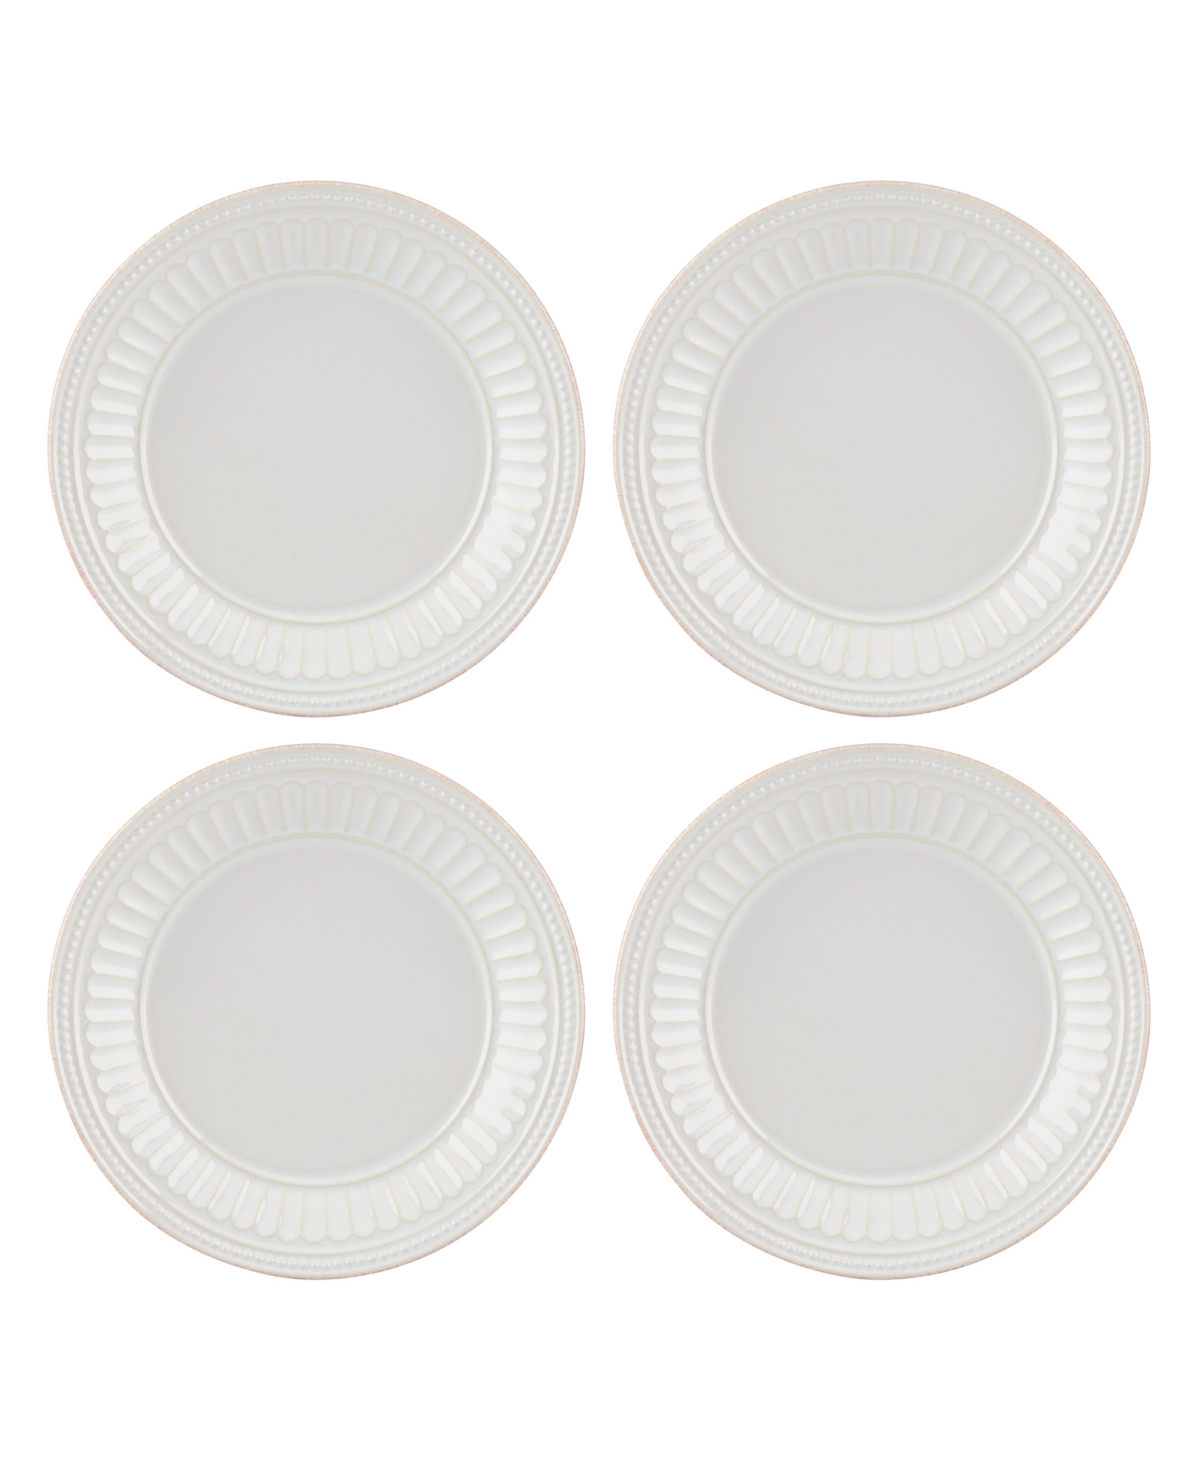 French Perle Groove Dessert Plates, Set Of 4 - White